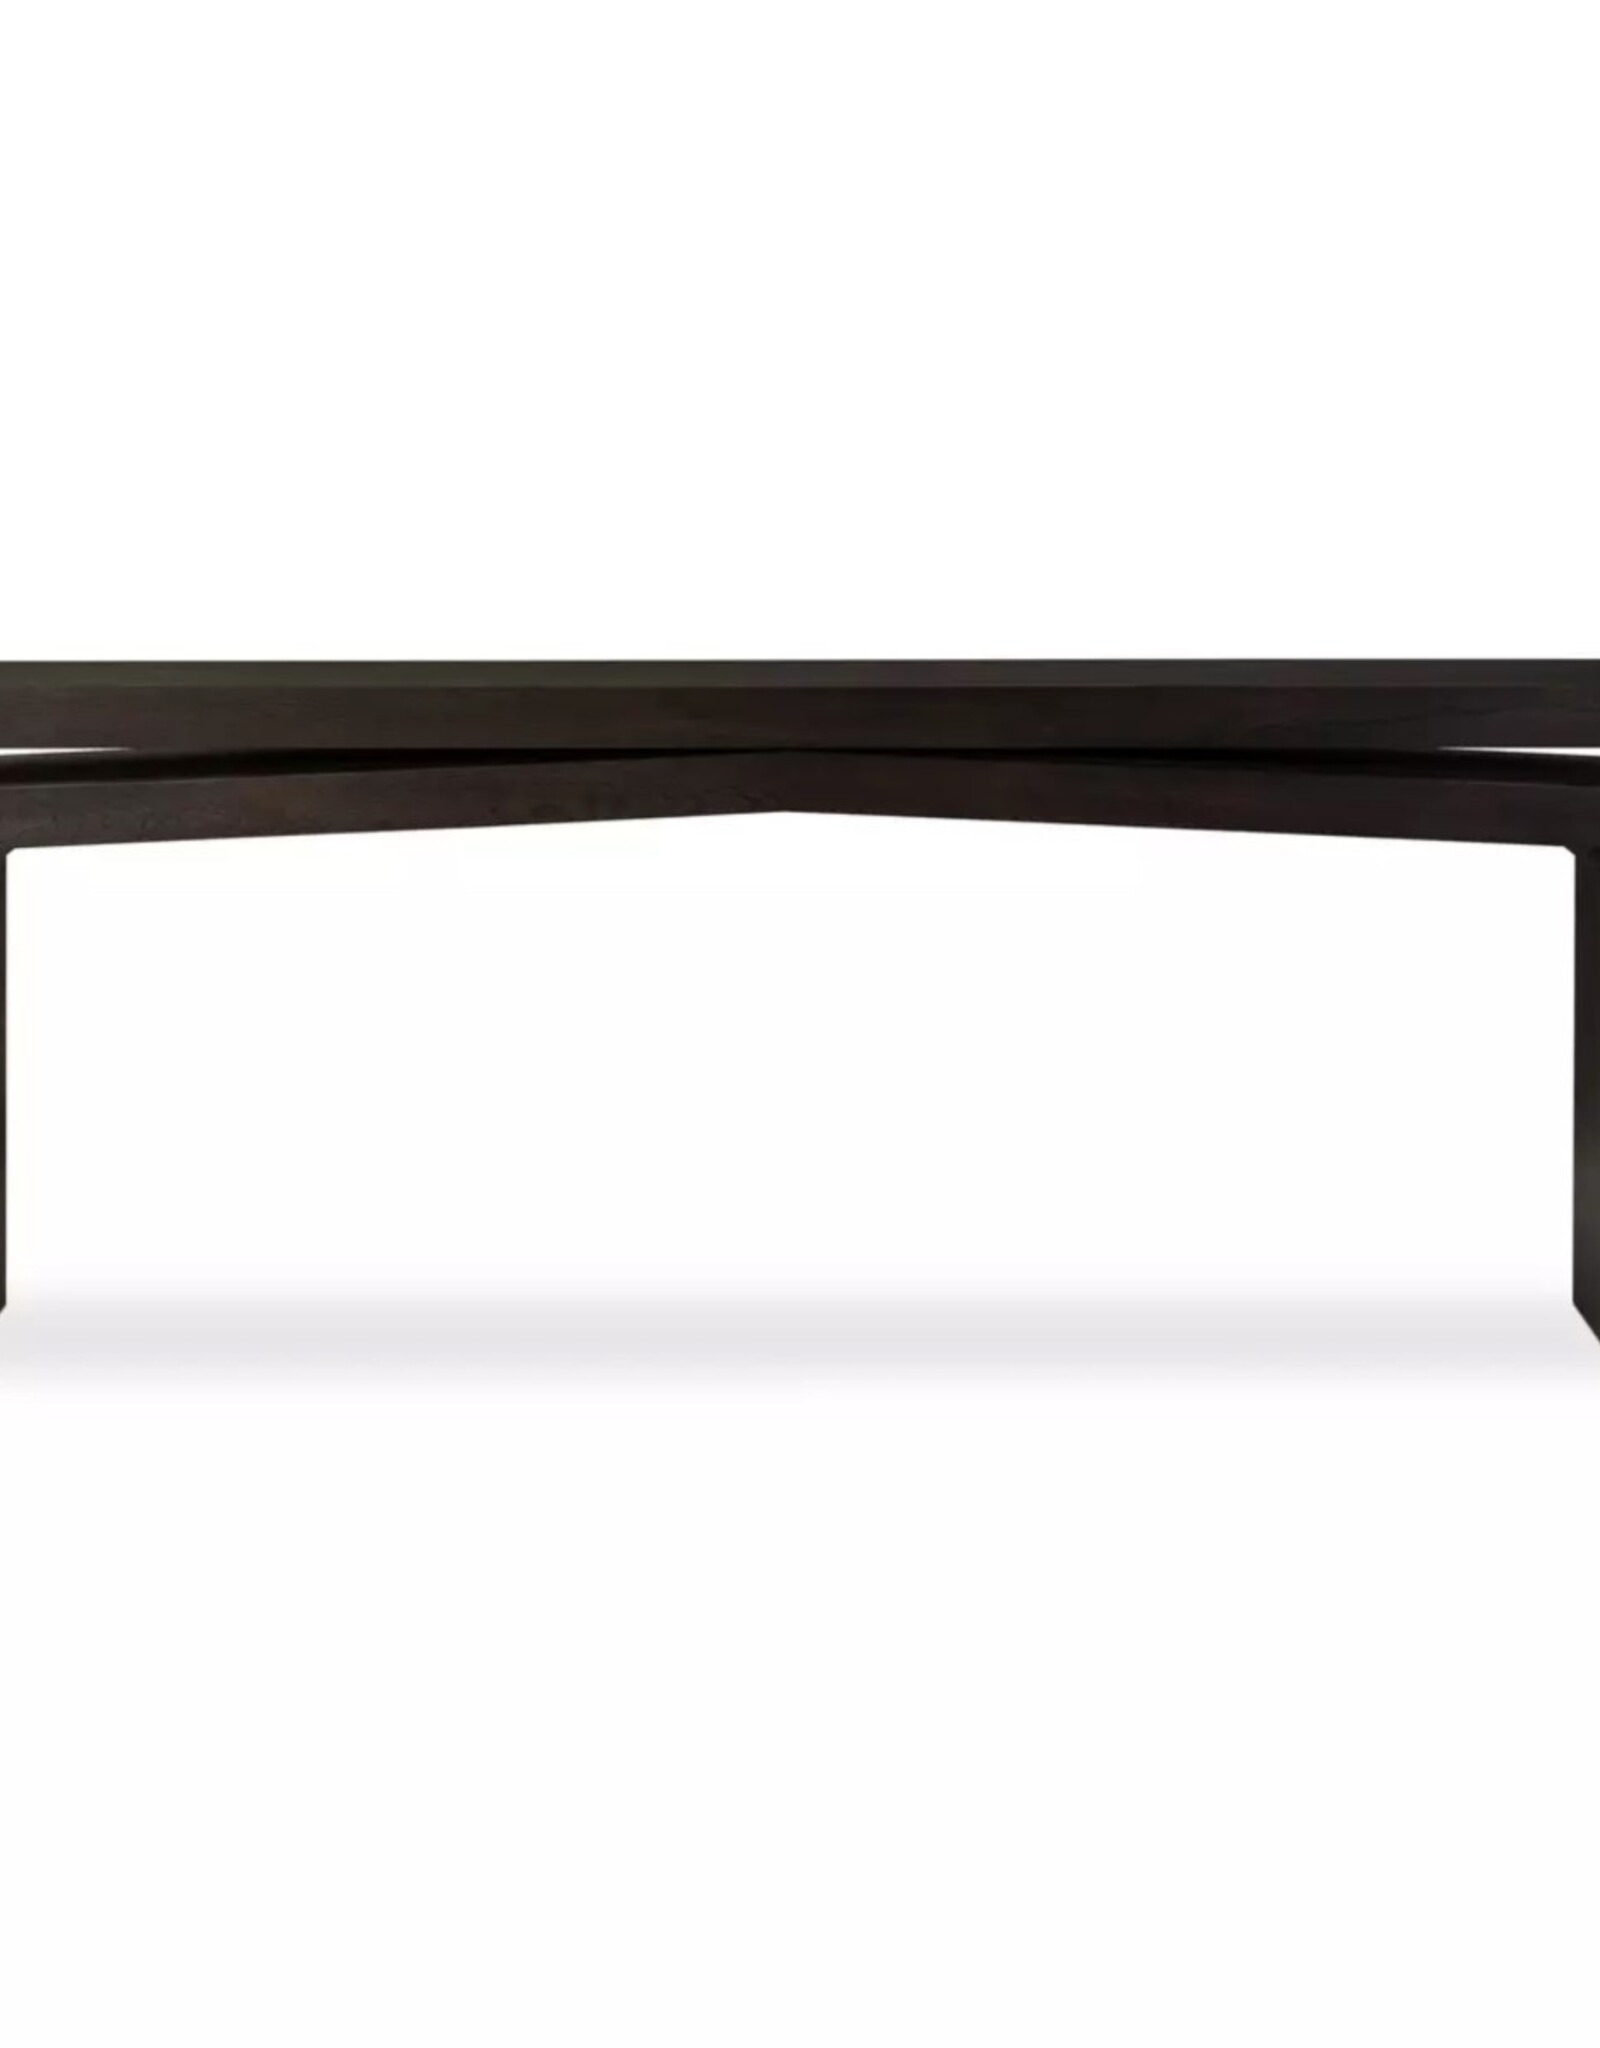 Matthes Oak Console Table in Smoked Black